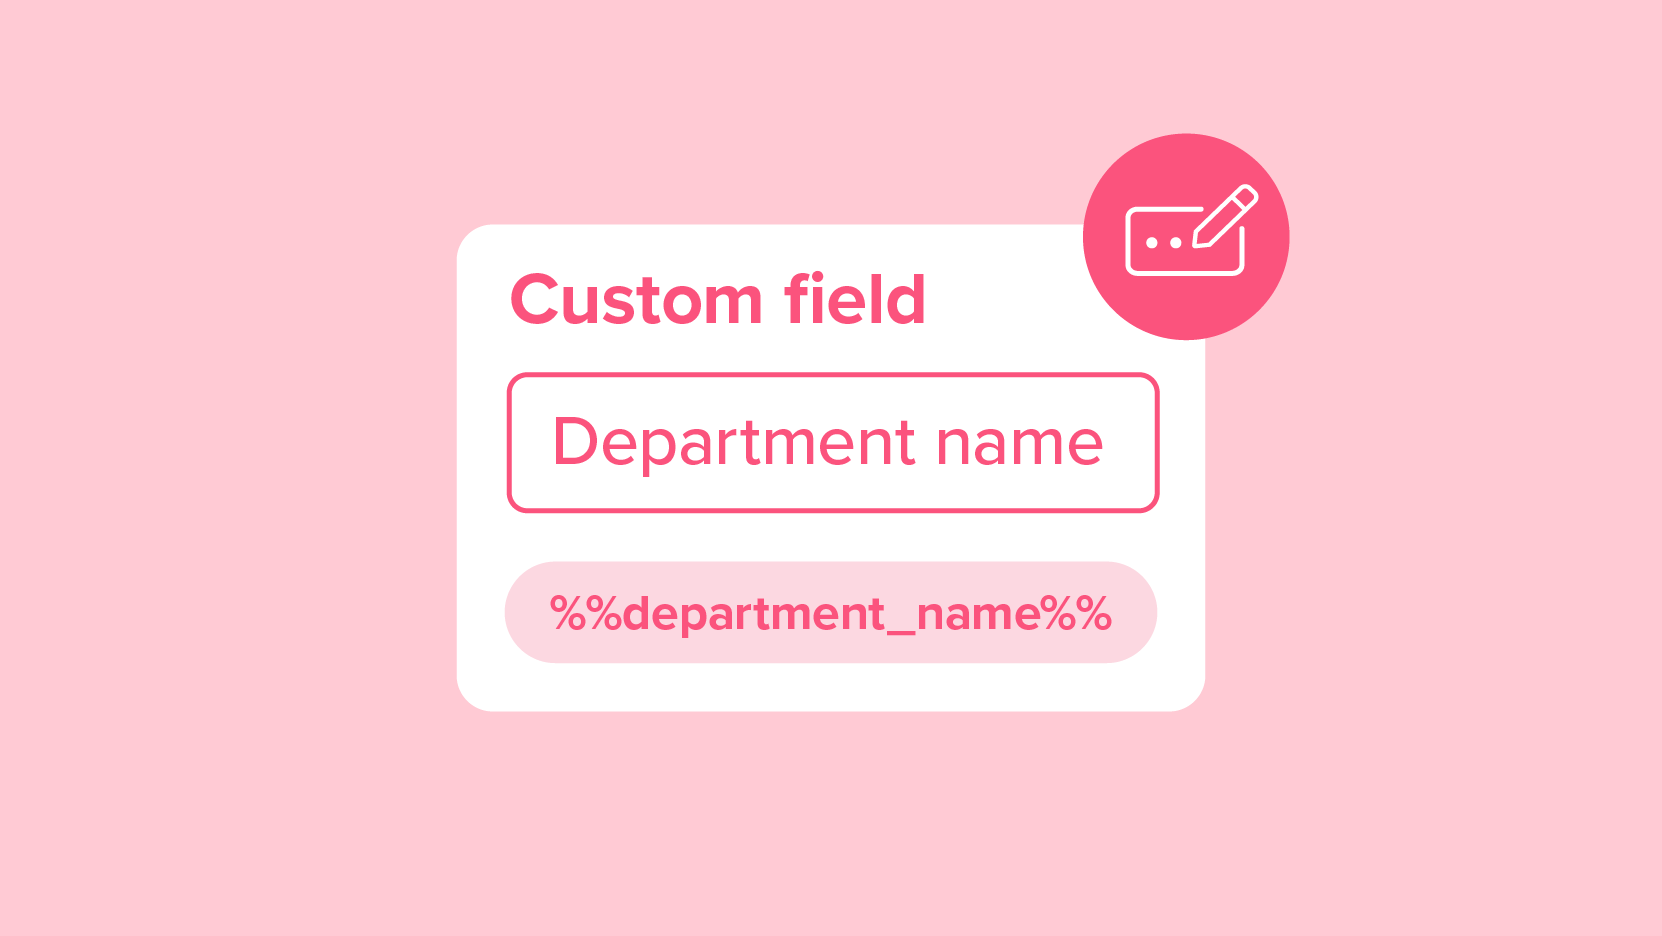 Image for Personalize Messages Using Custom Fields